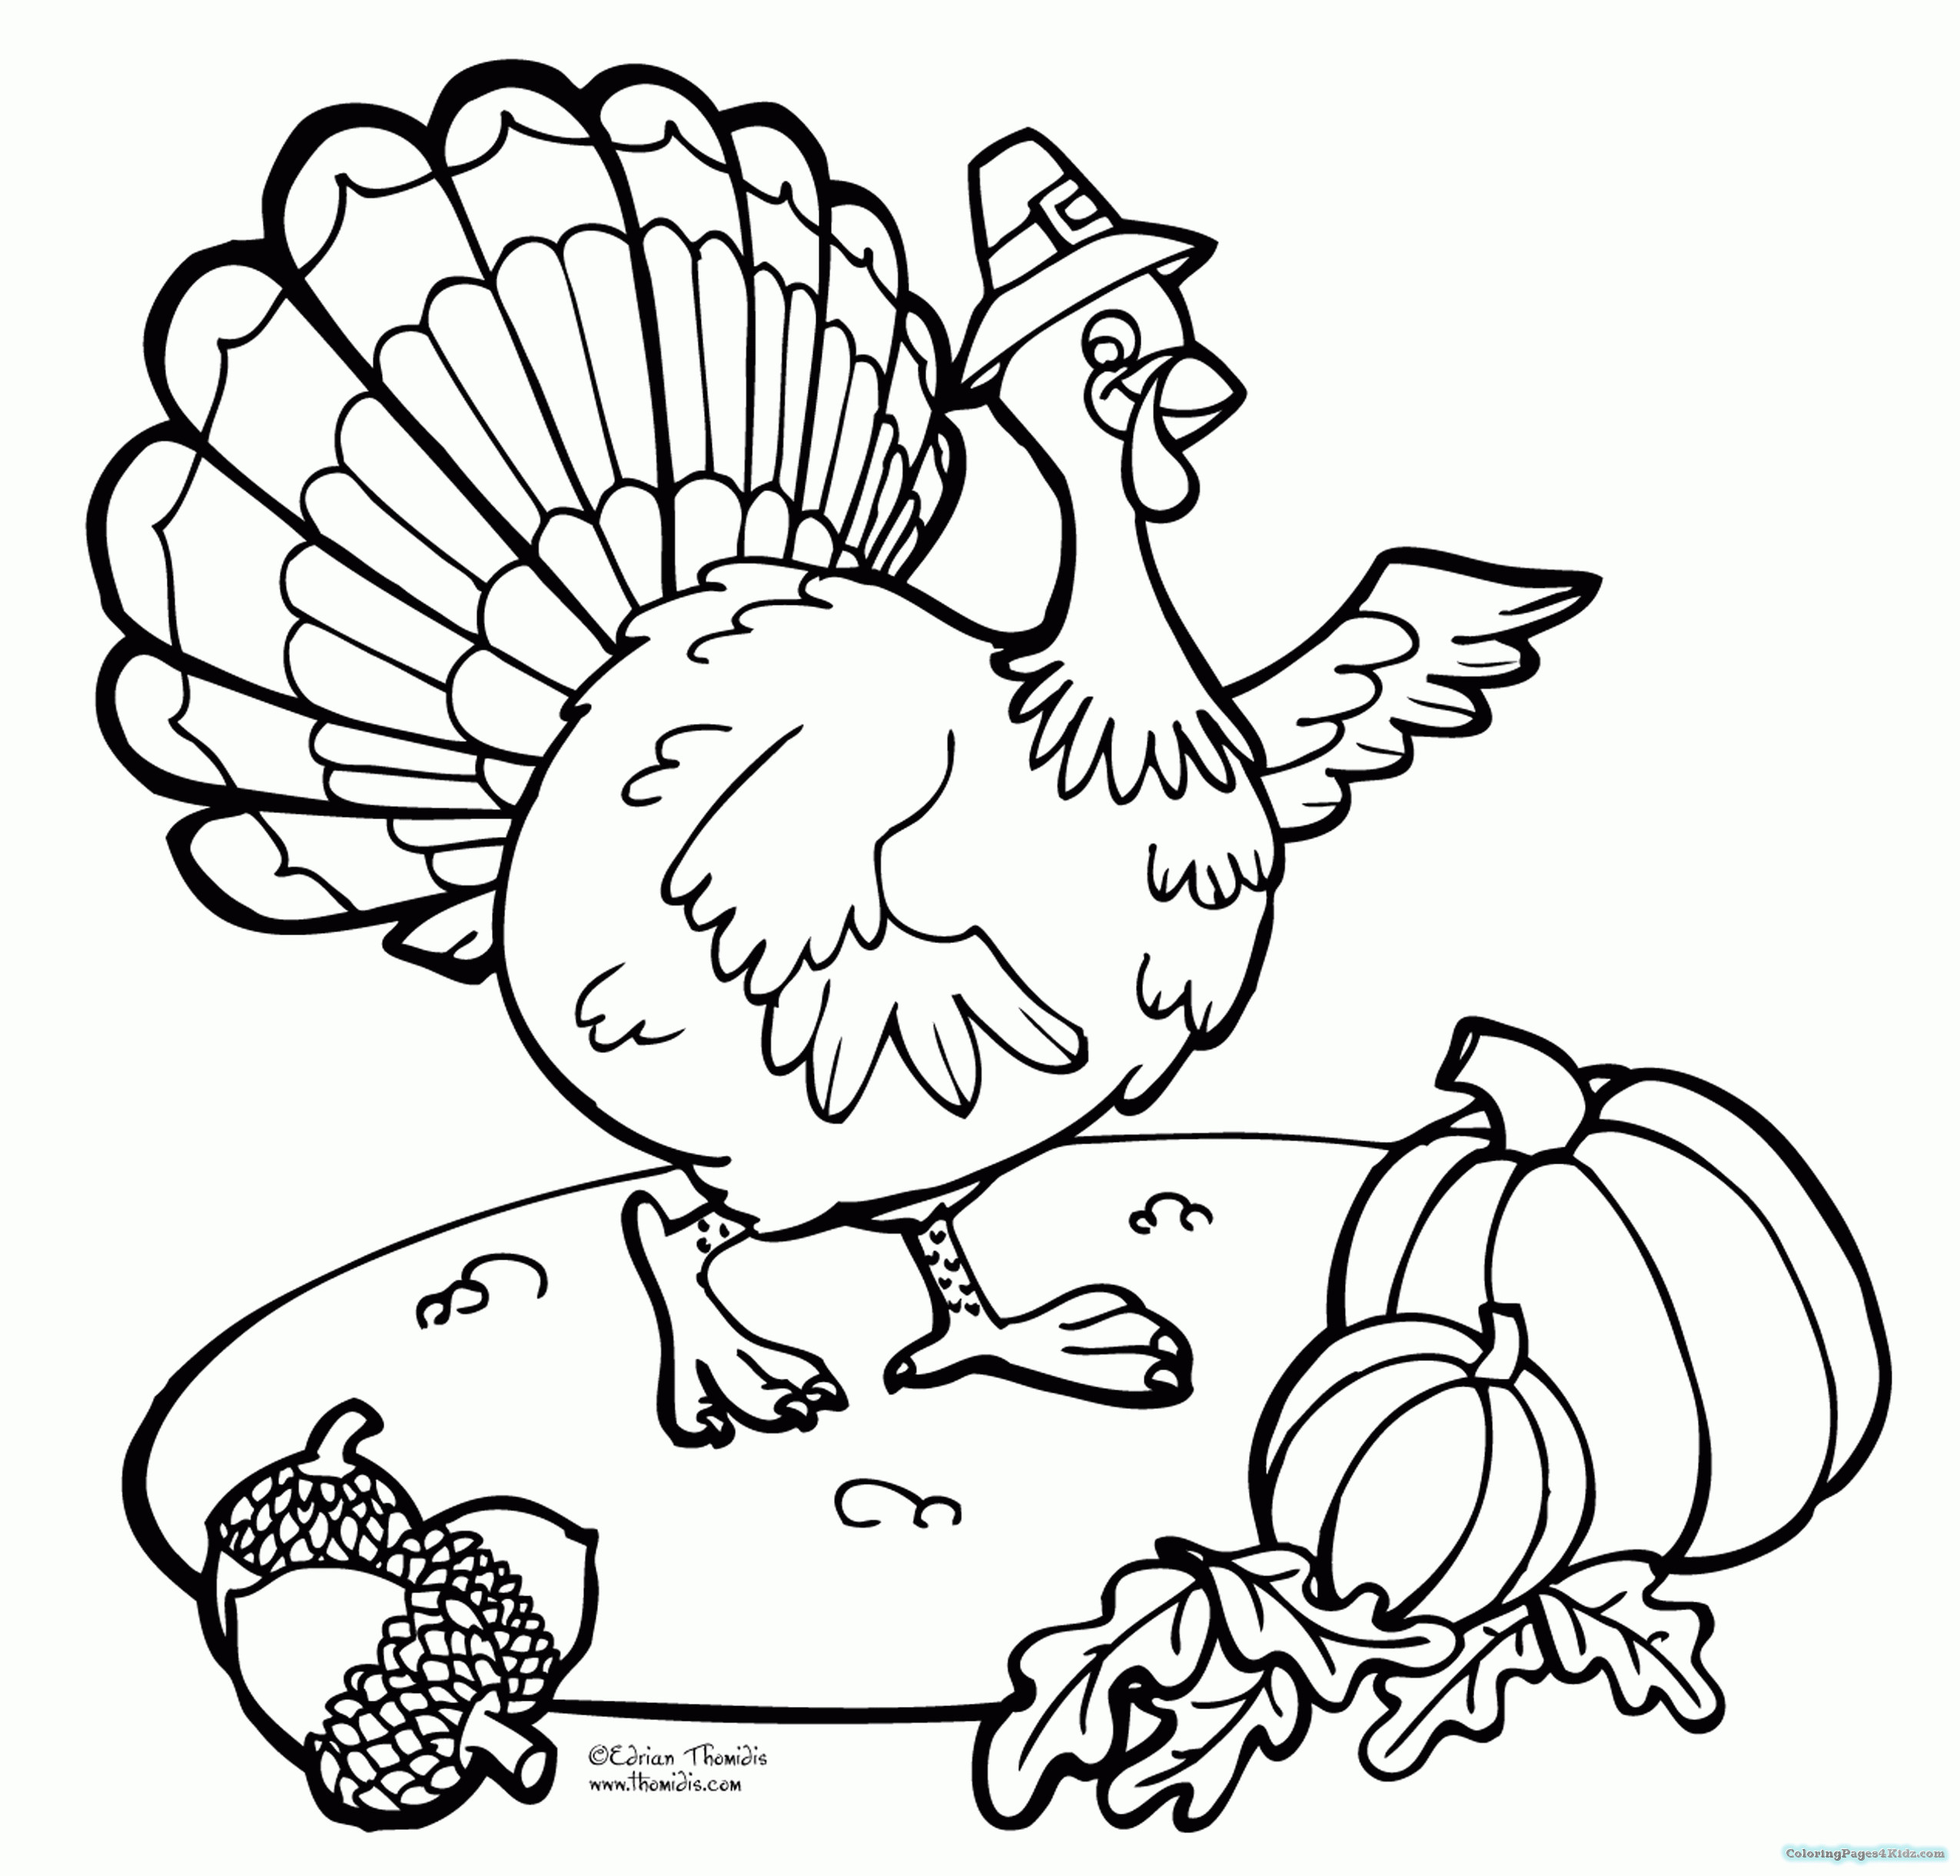 Religious Thanksgiving Coloring Pages For Kids
 Free Christian Thanksgiving Coloring Pages